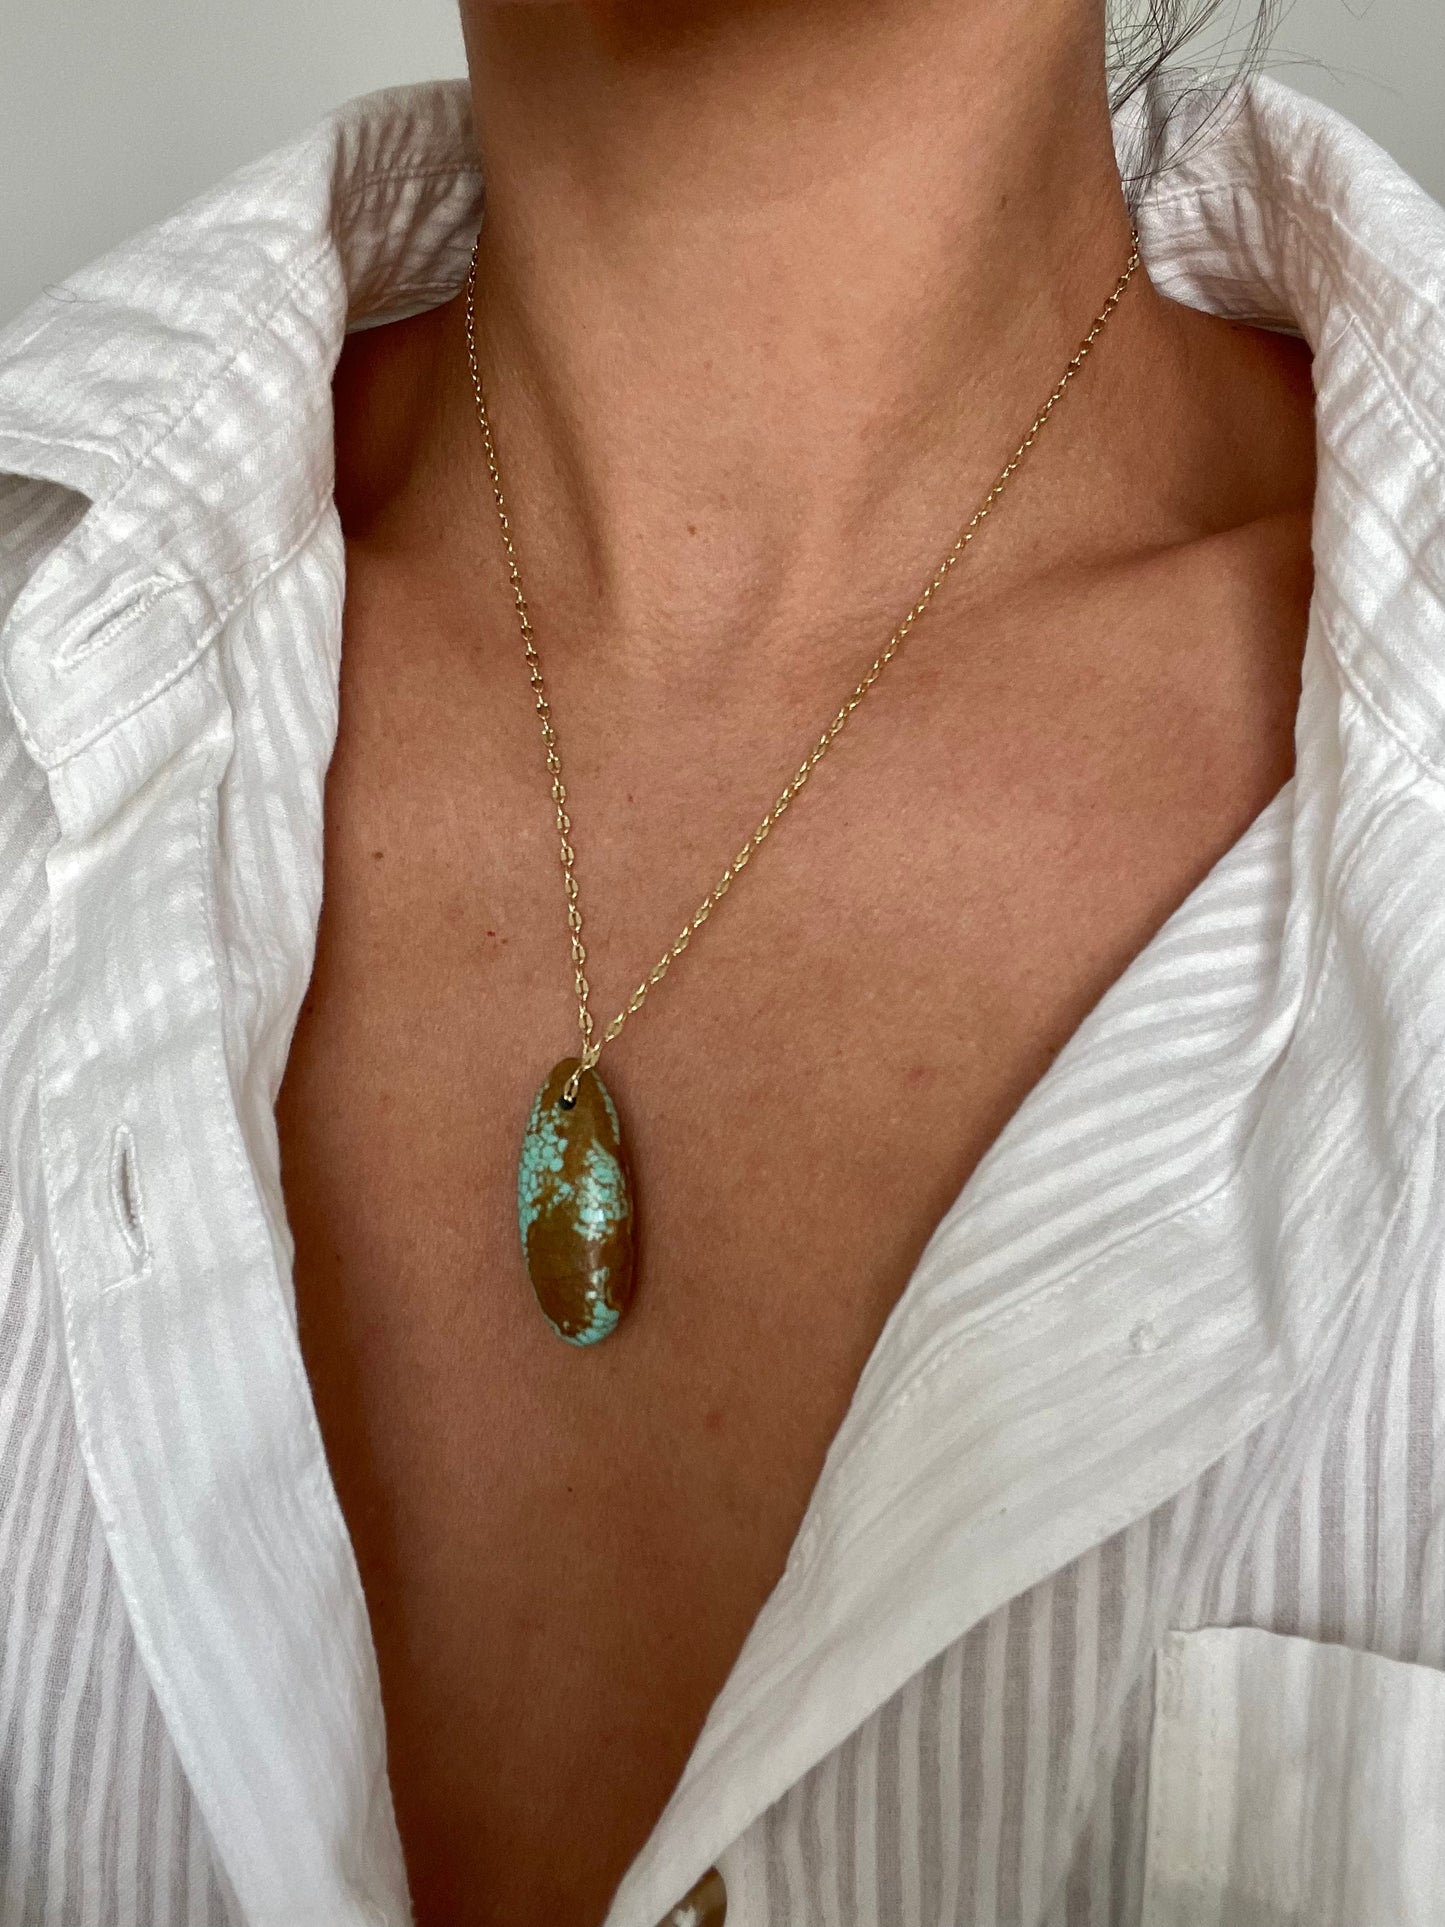 Turquoise Chunk on Gold Chain